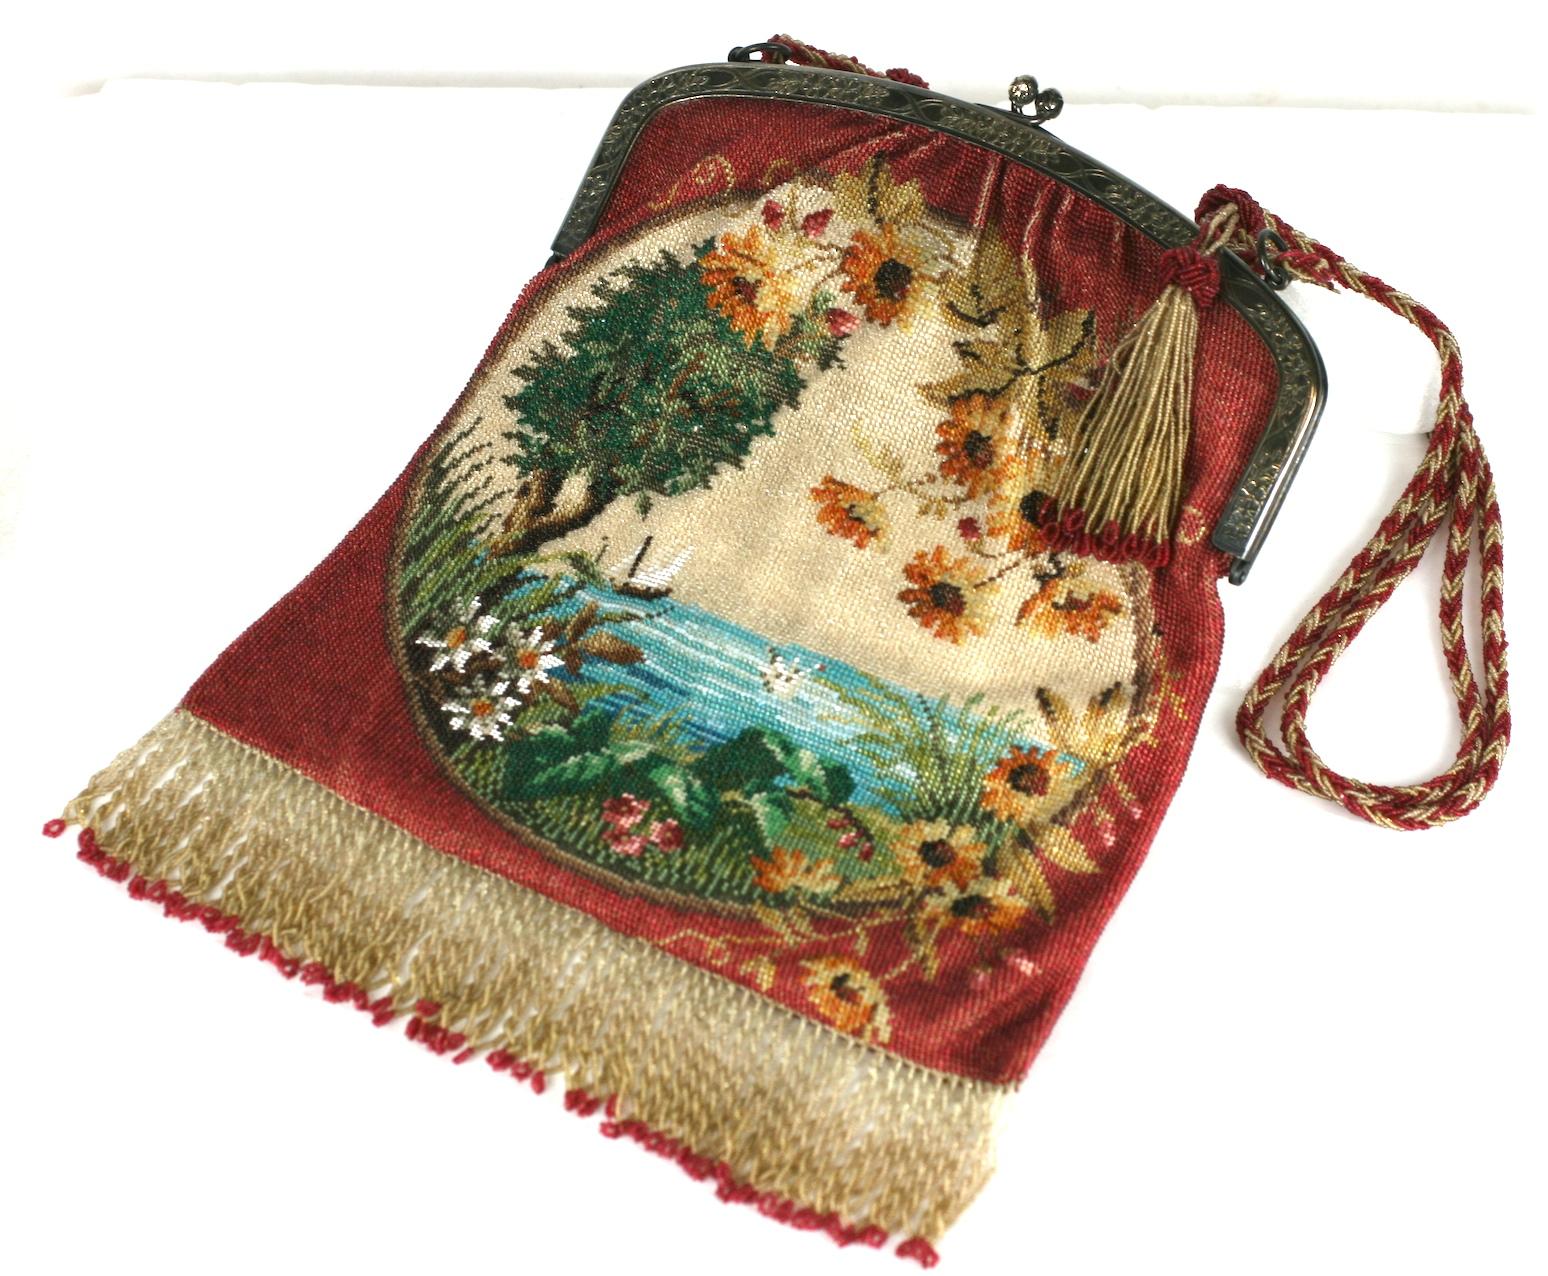 Exceptional and collectible Micro Beaded Bag from the early 20th Century with hand beaded and braided handle with tassels. Pictorial micro beading creates a vignette with sailing ships in a distant ocean scene. Daisies are falling down around the